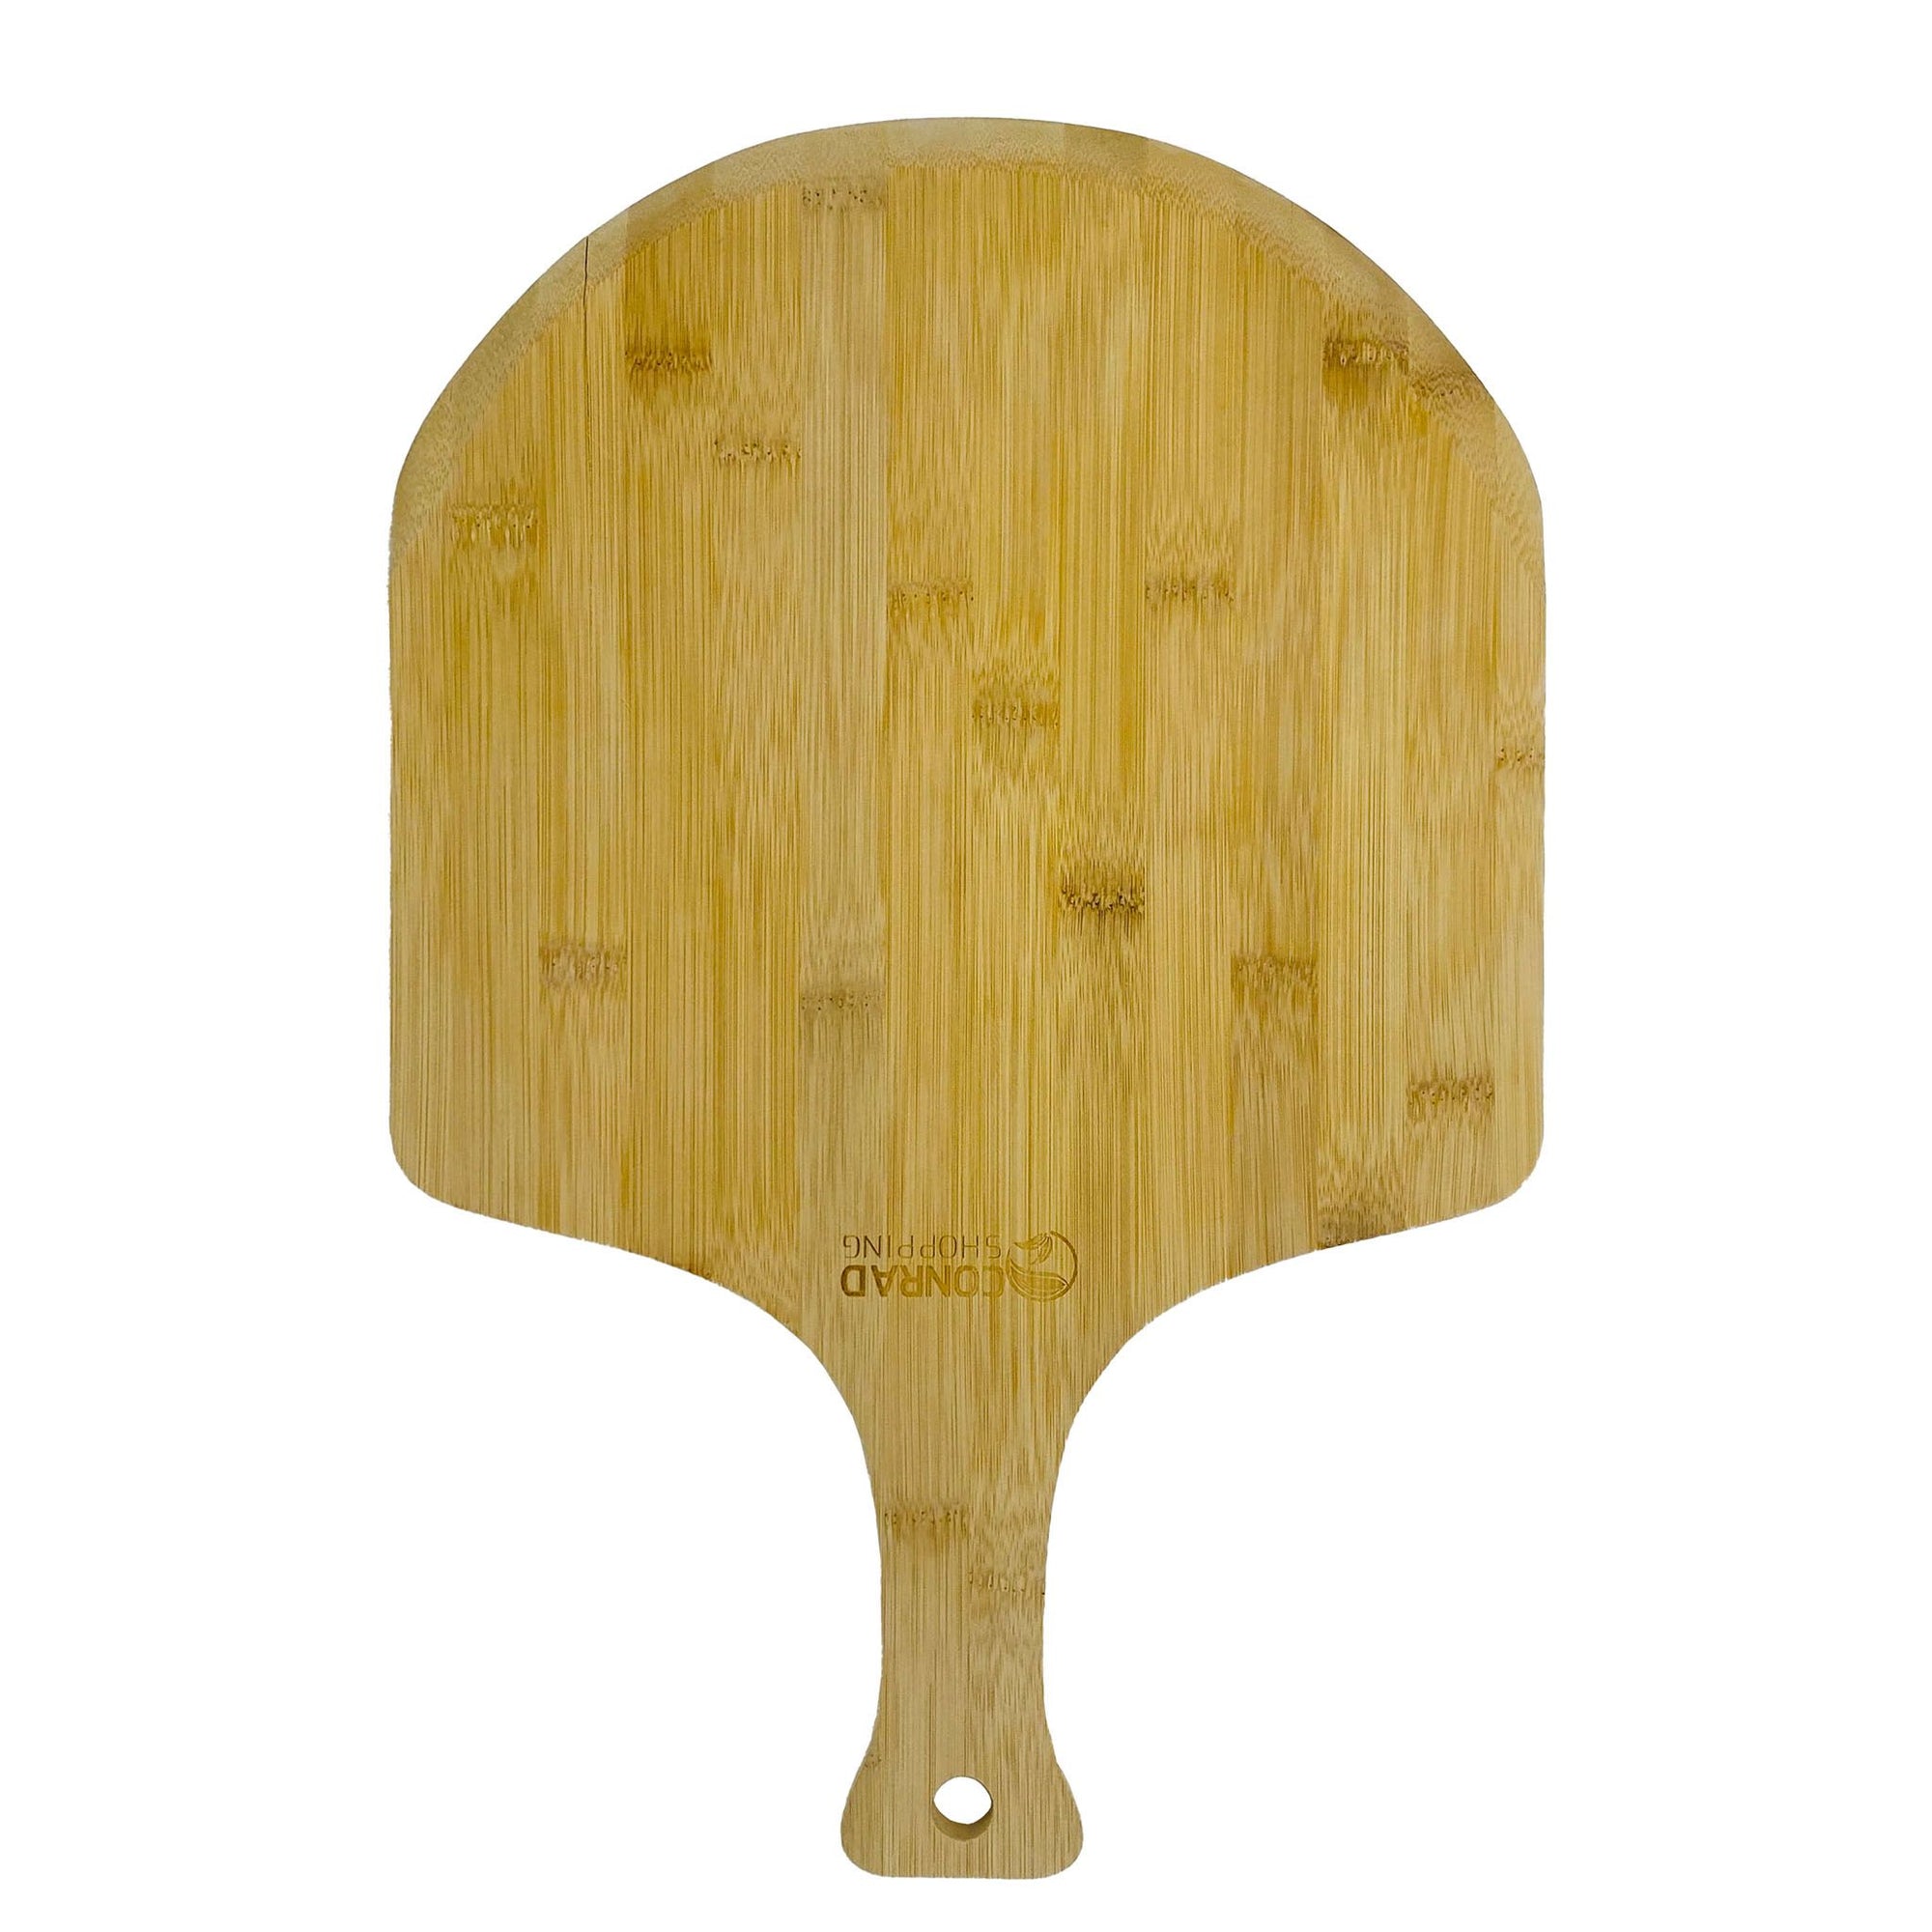 Wooden Pizza Peel Large | Shovel for Lifting Pizza